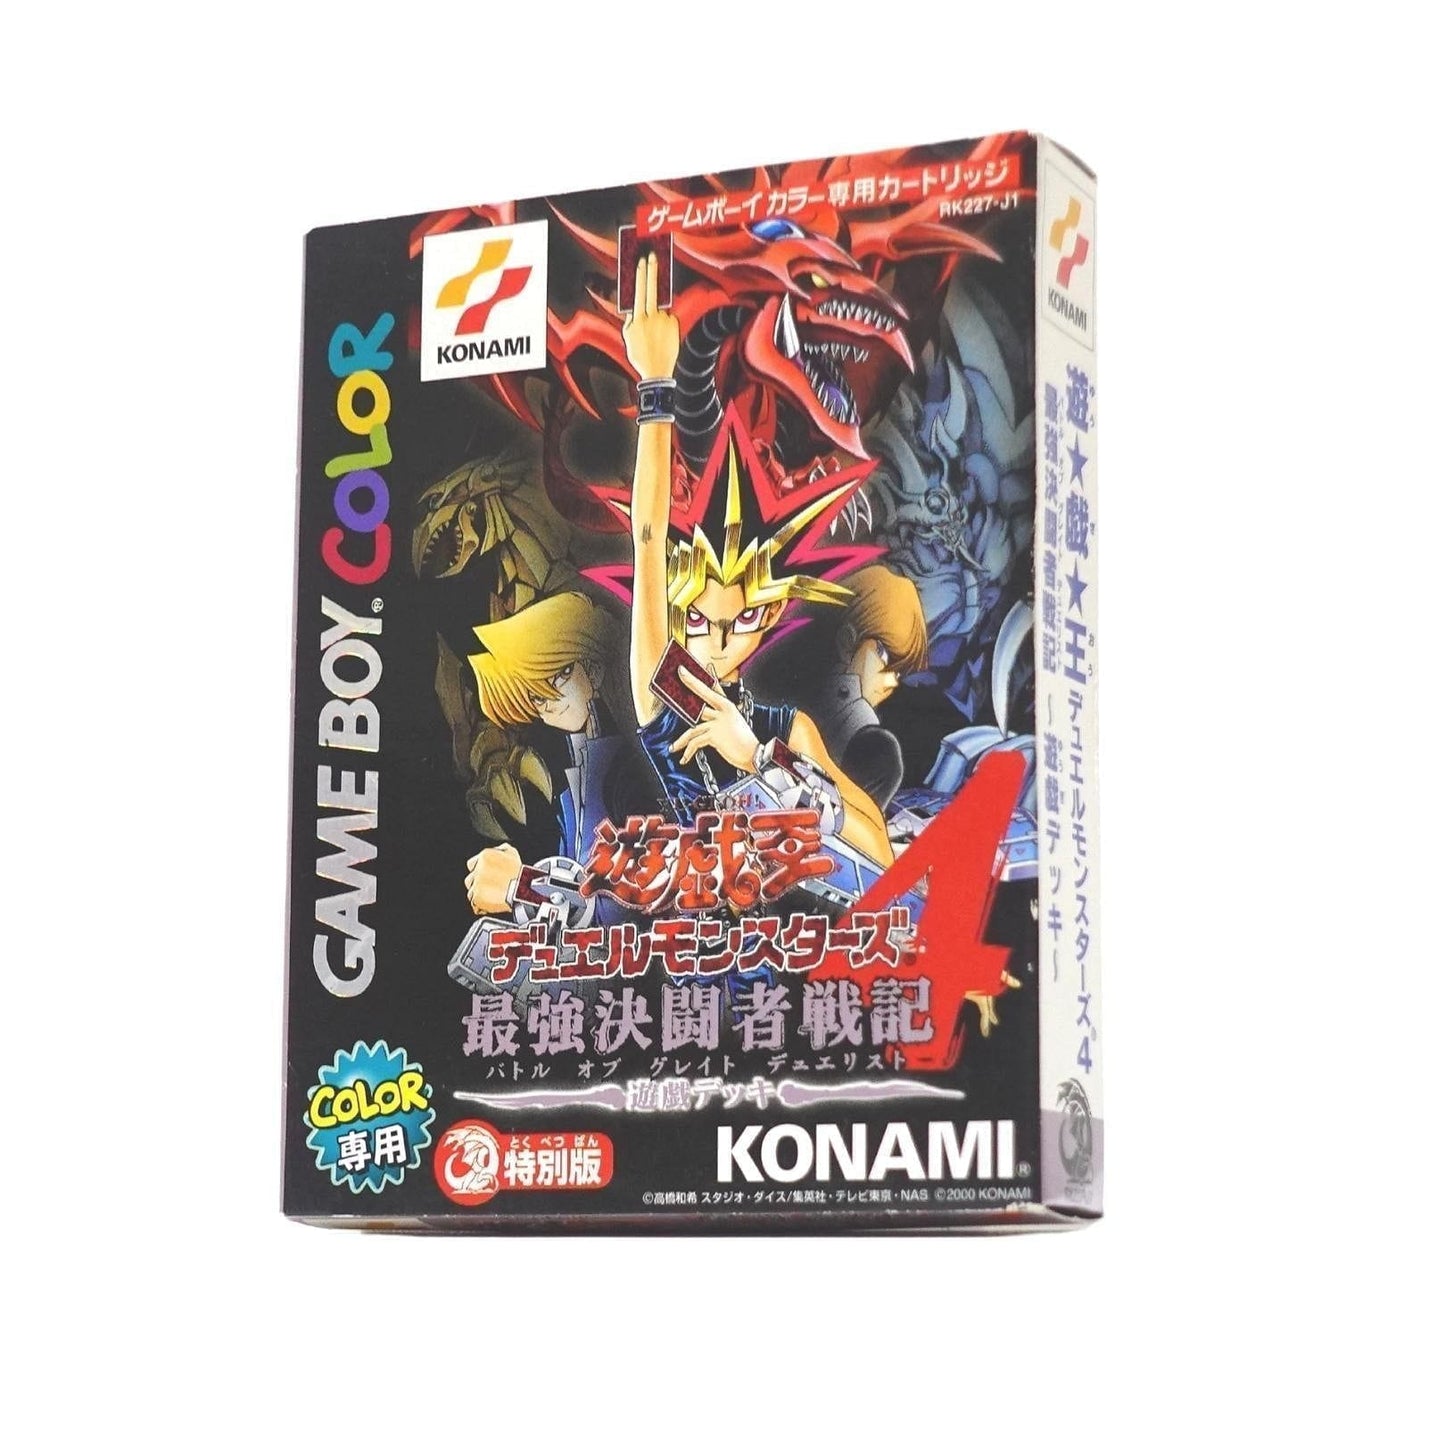 Yu Gi Oh! Duel Monsters 4: Battle of Great Duelists | Game Boy Color ChitoroShop